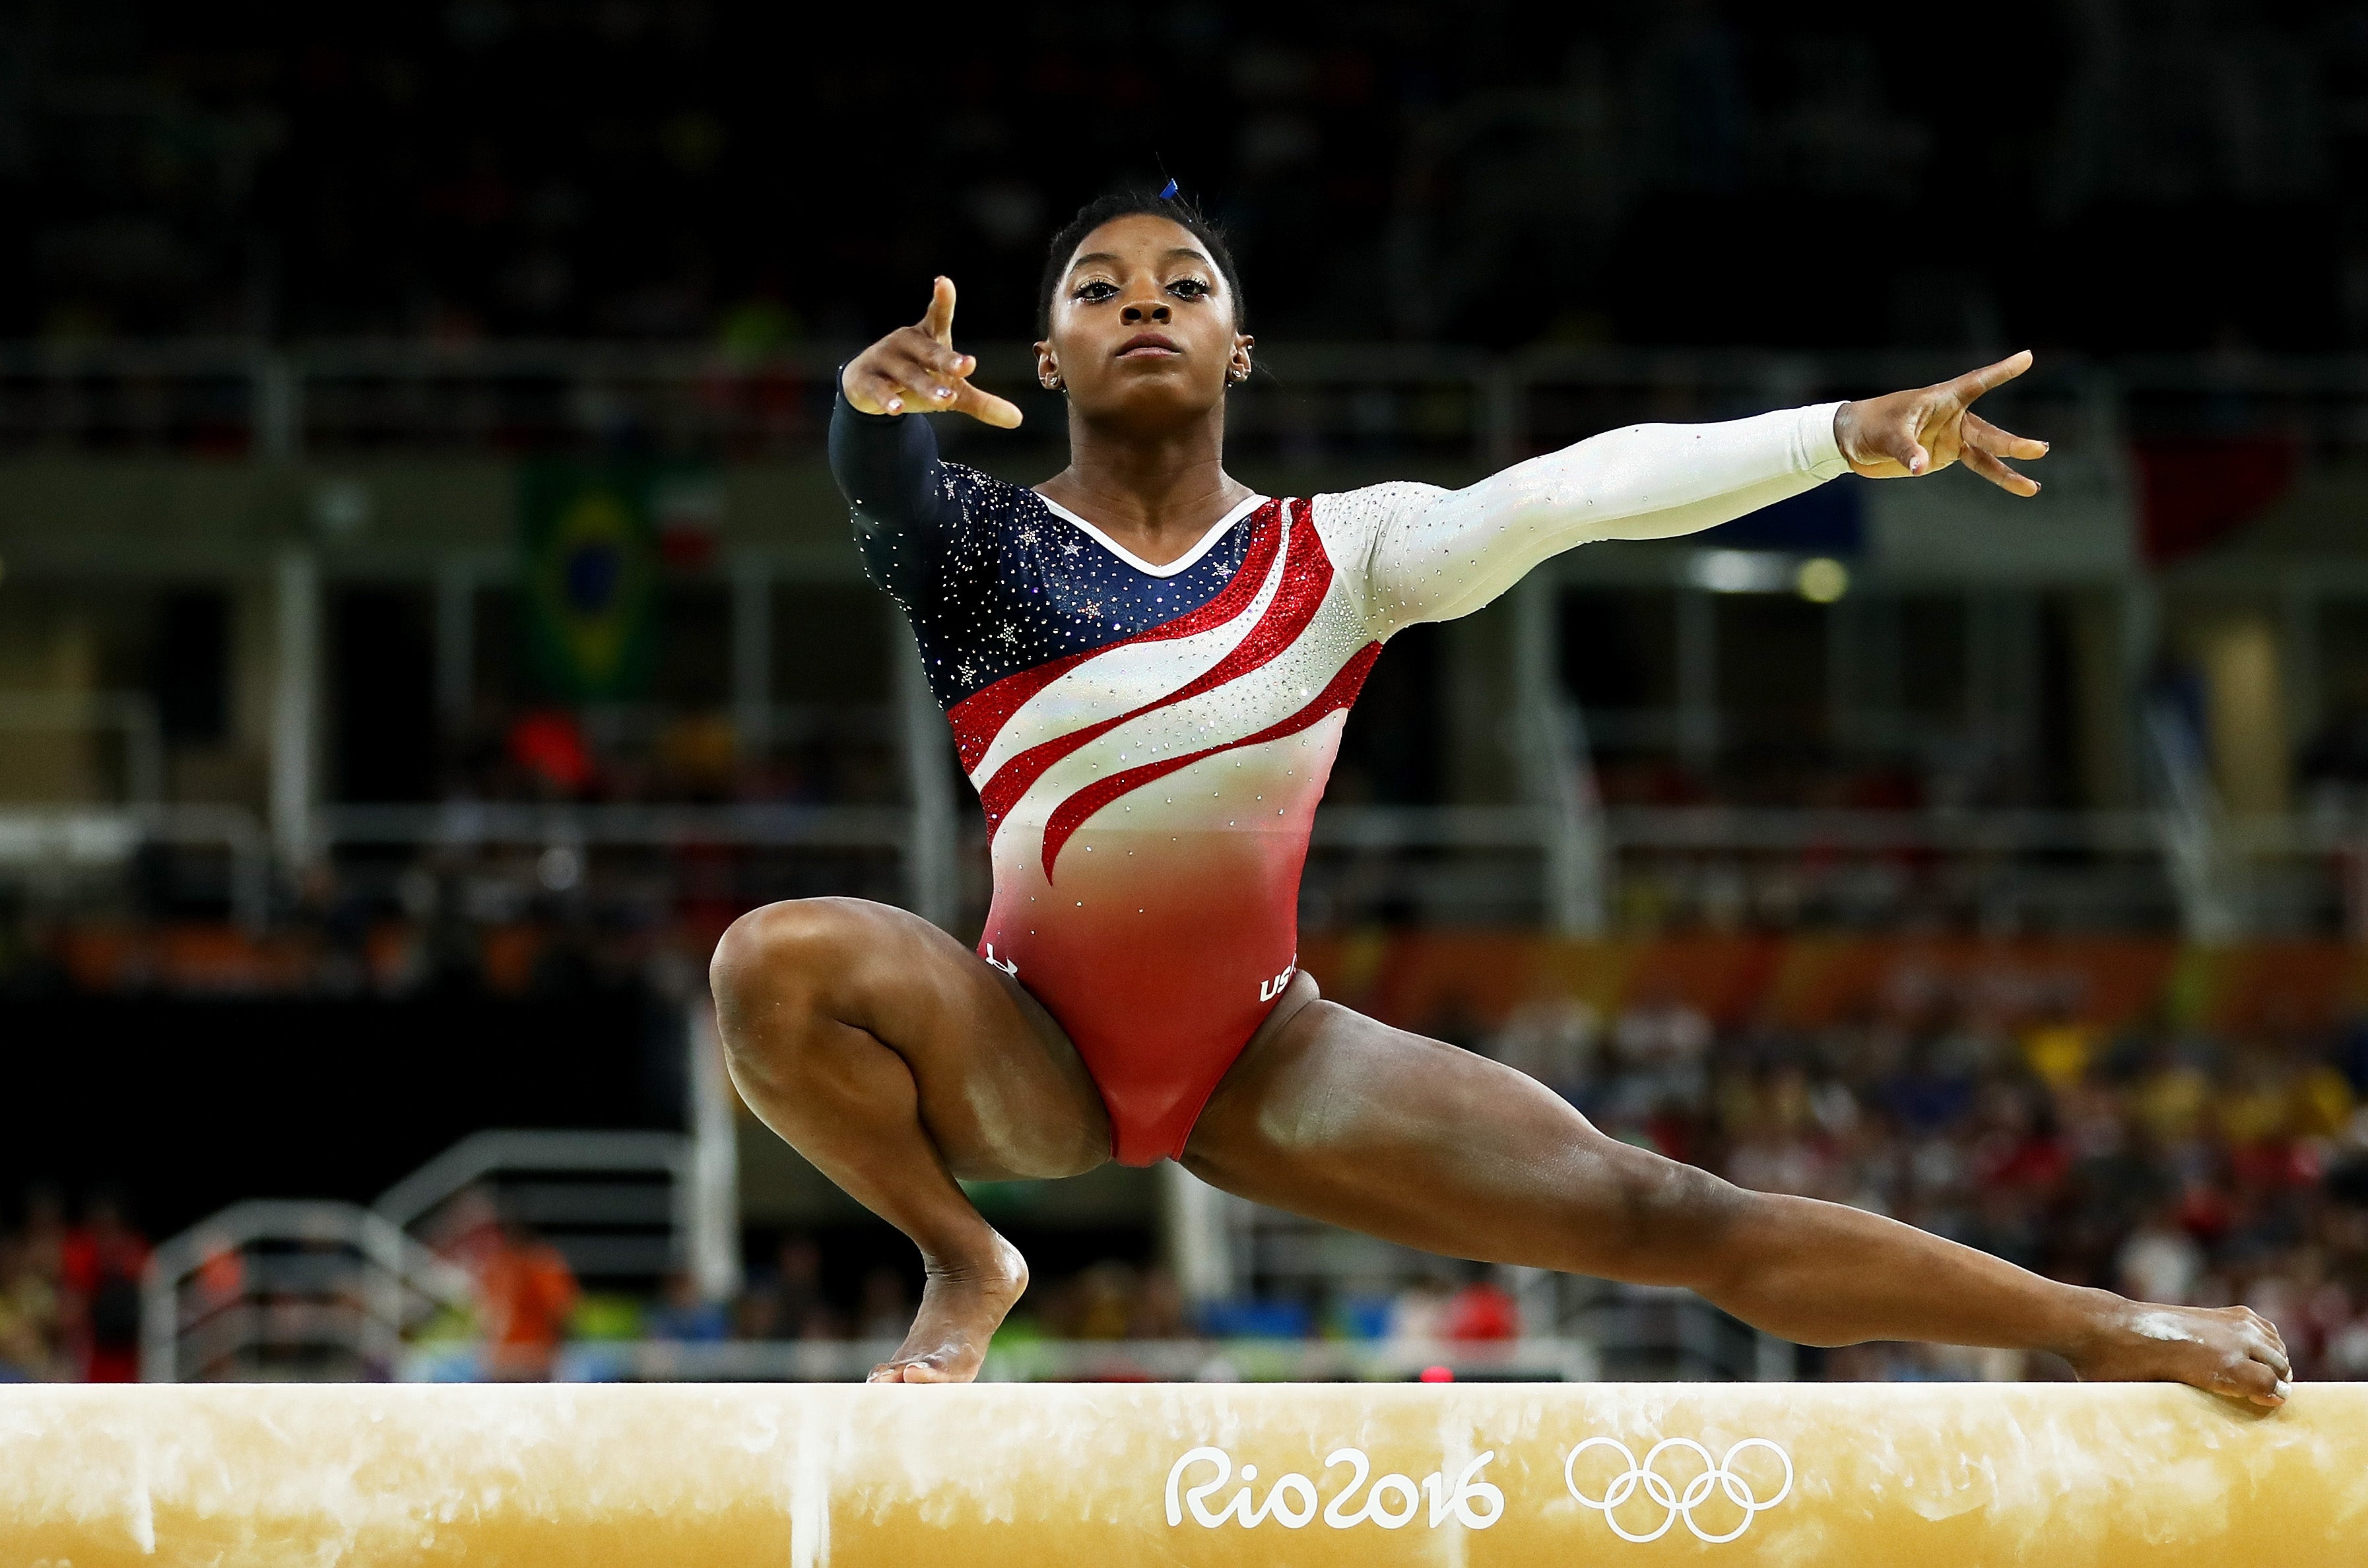 Us Womens Gymnastics Team Wins Gold Medal At 2016 Rio Olympics See The Final Five In Action 